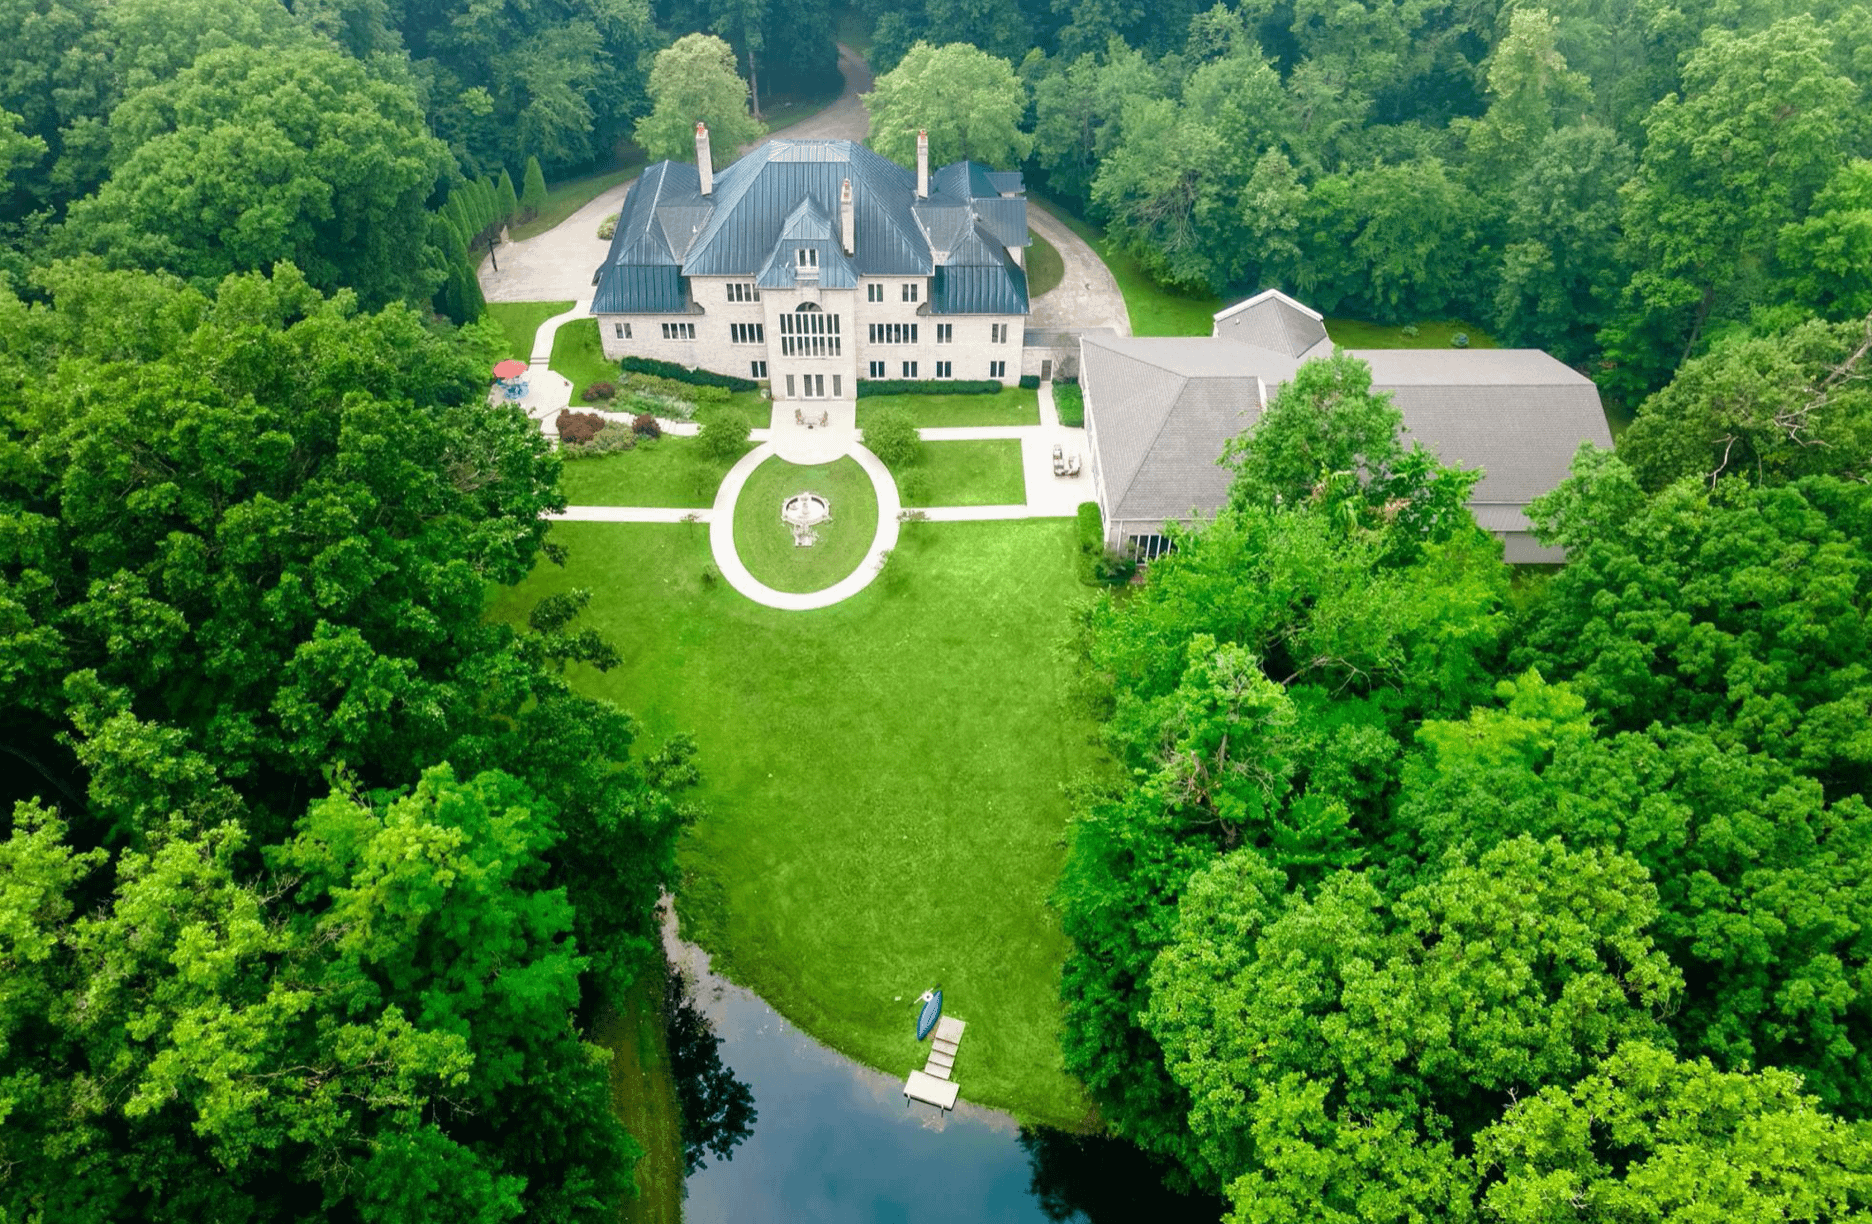 22,000 Square Foot Estate In Fort Wayne, Indiana (PHOTOS)